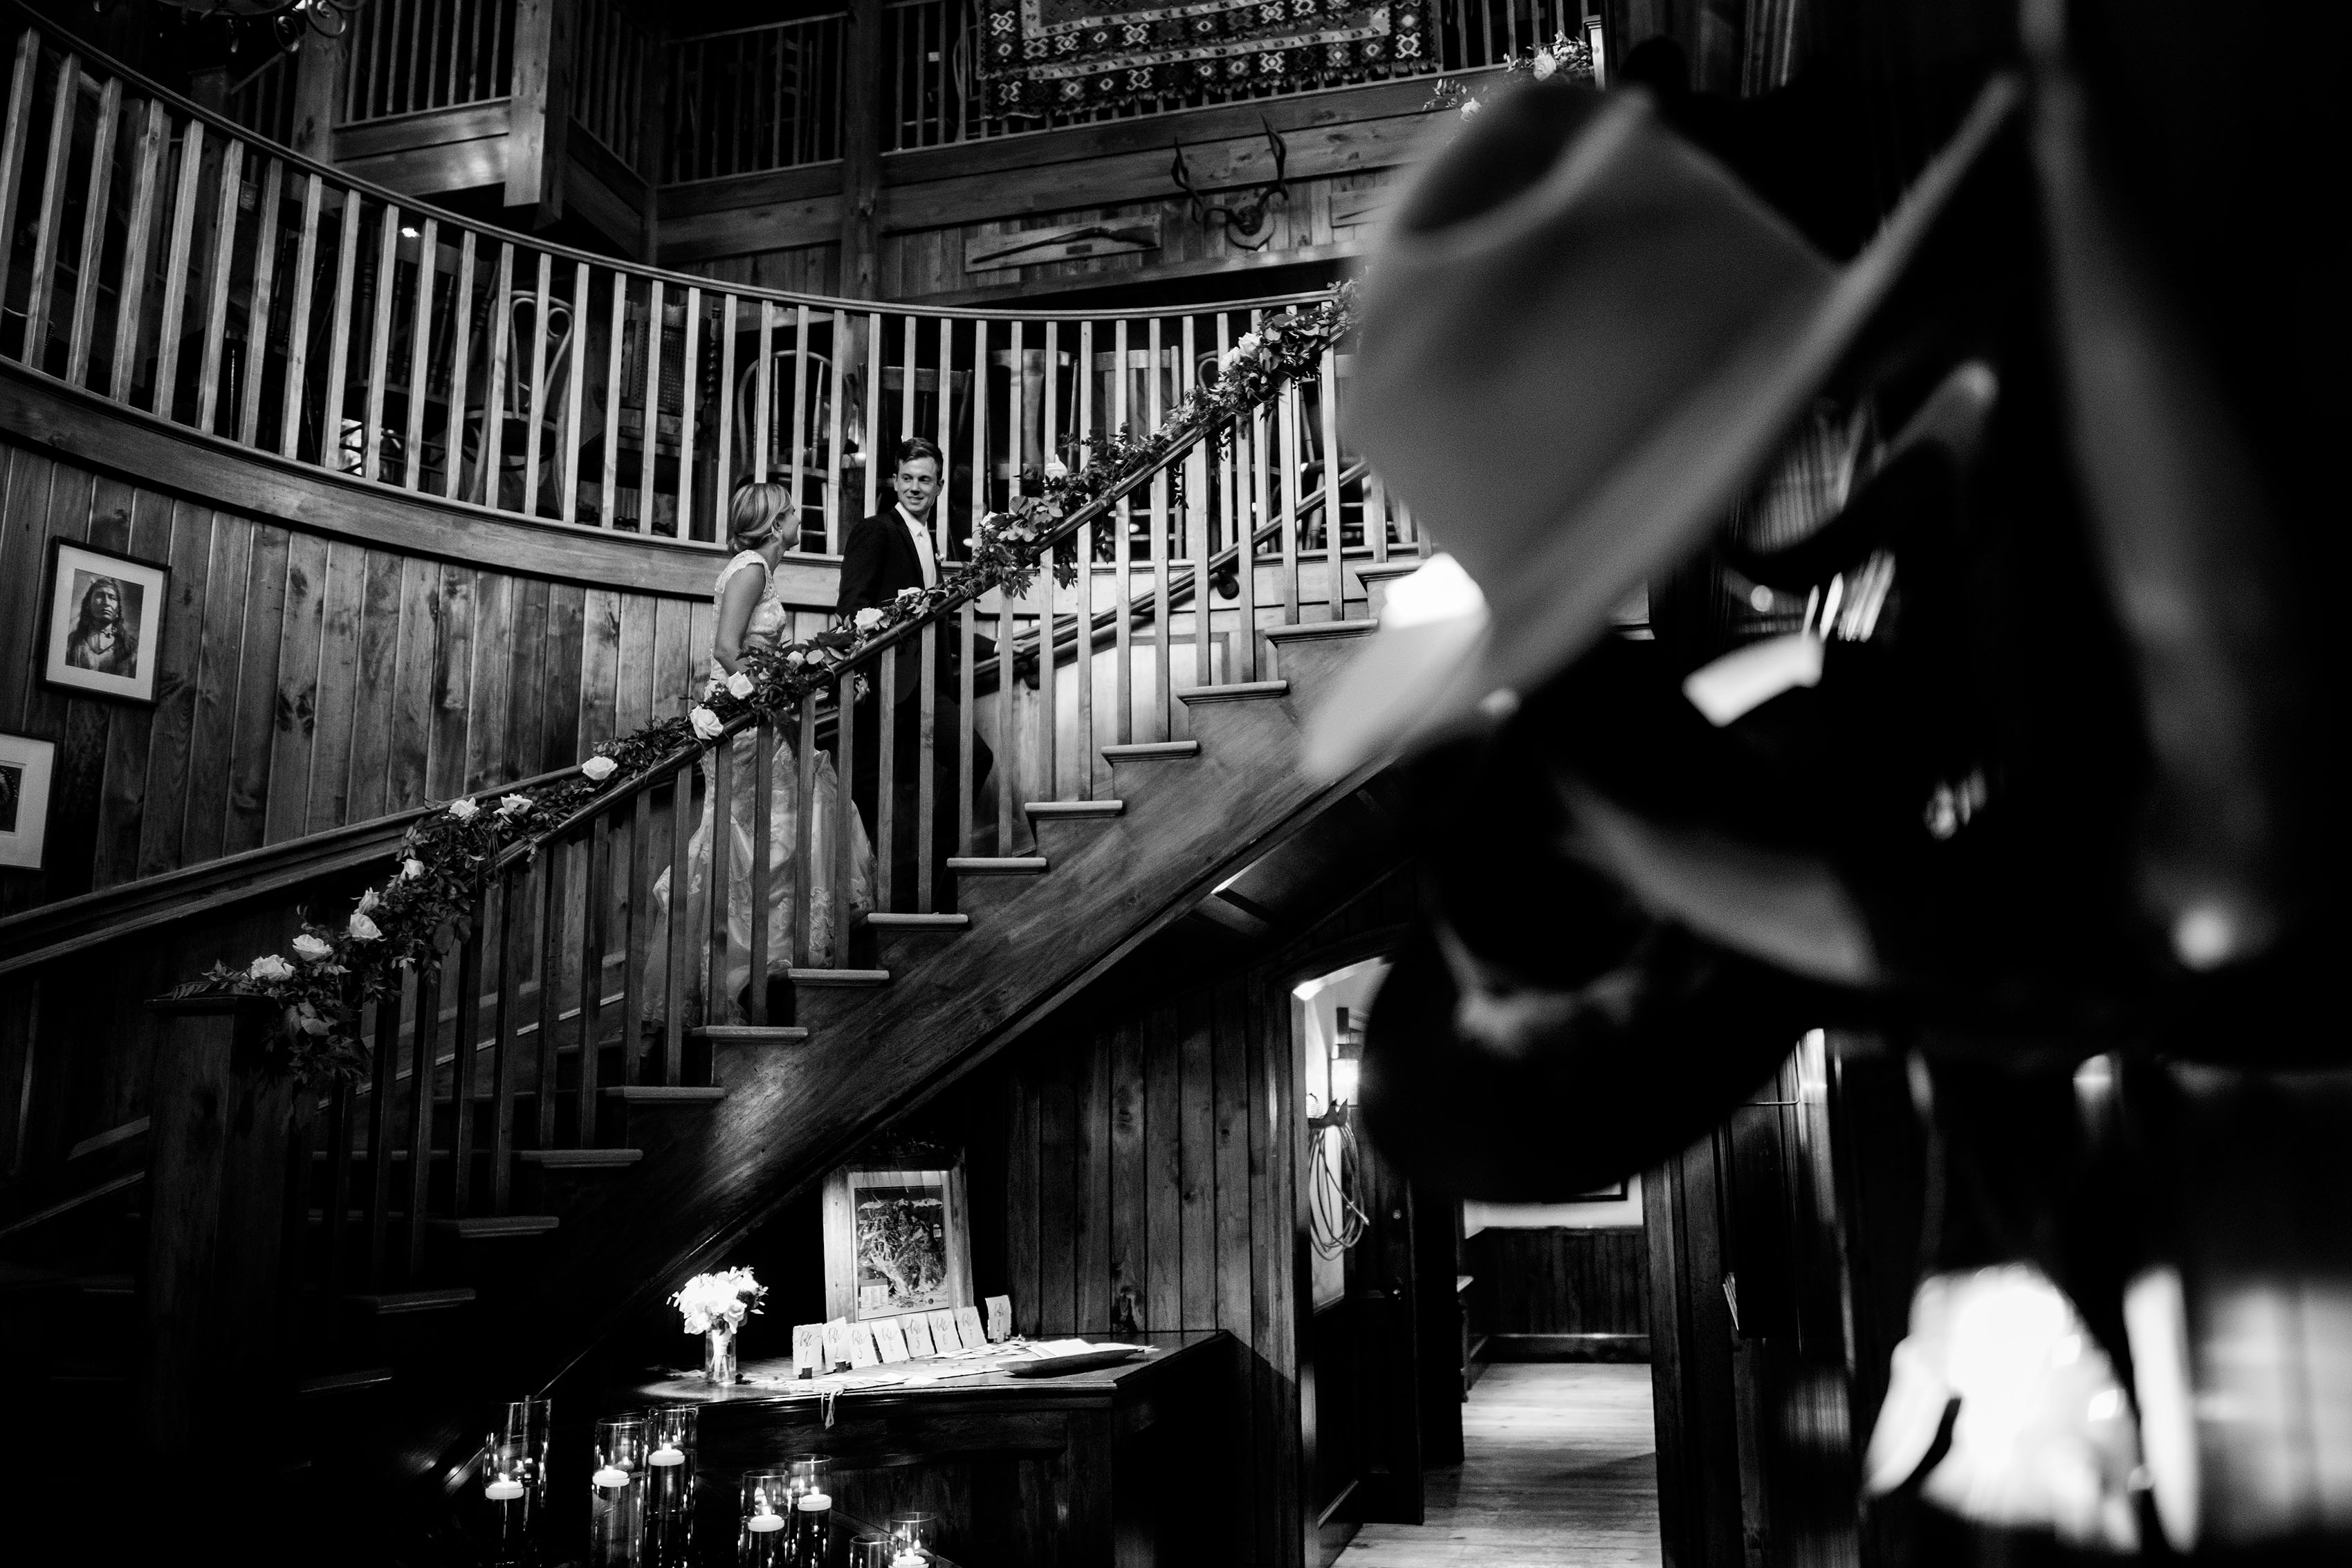 The newlyweds climb the spiral staircase at Saddleridge